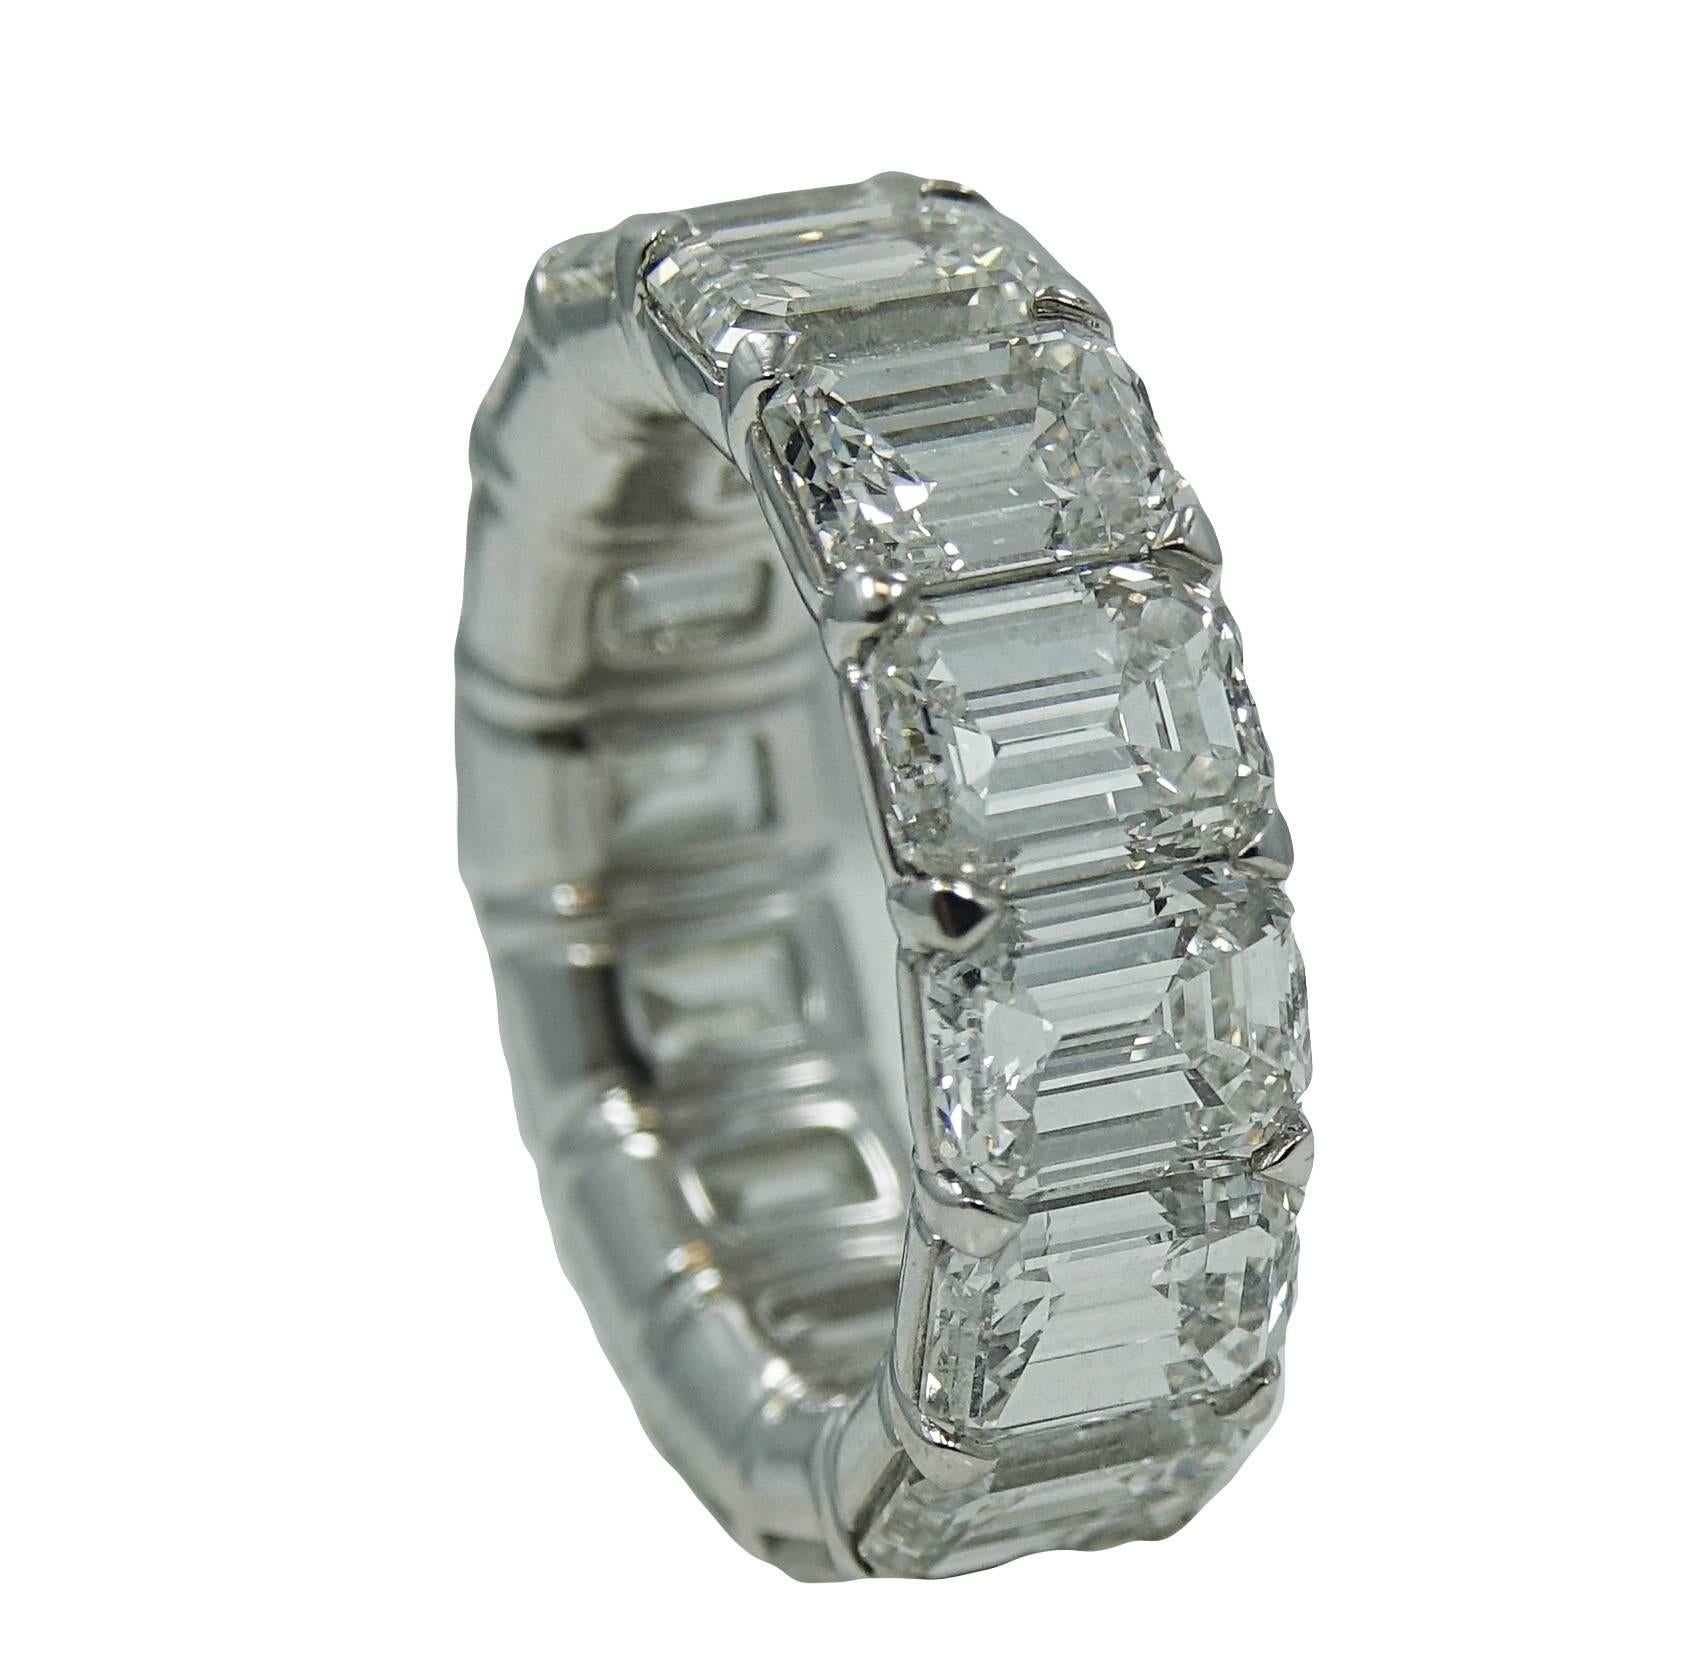 Platinum Eternity Band With 15 Radiant Cut Diamonds Weighing A Total Carat Weight Of 11.18ct In a Buttercup Mounting. This Ring Is A Size 7.